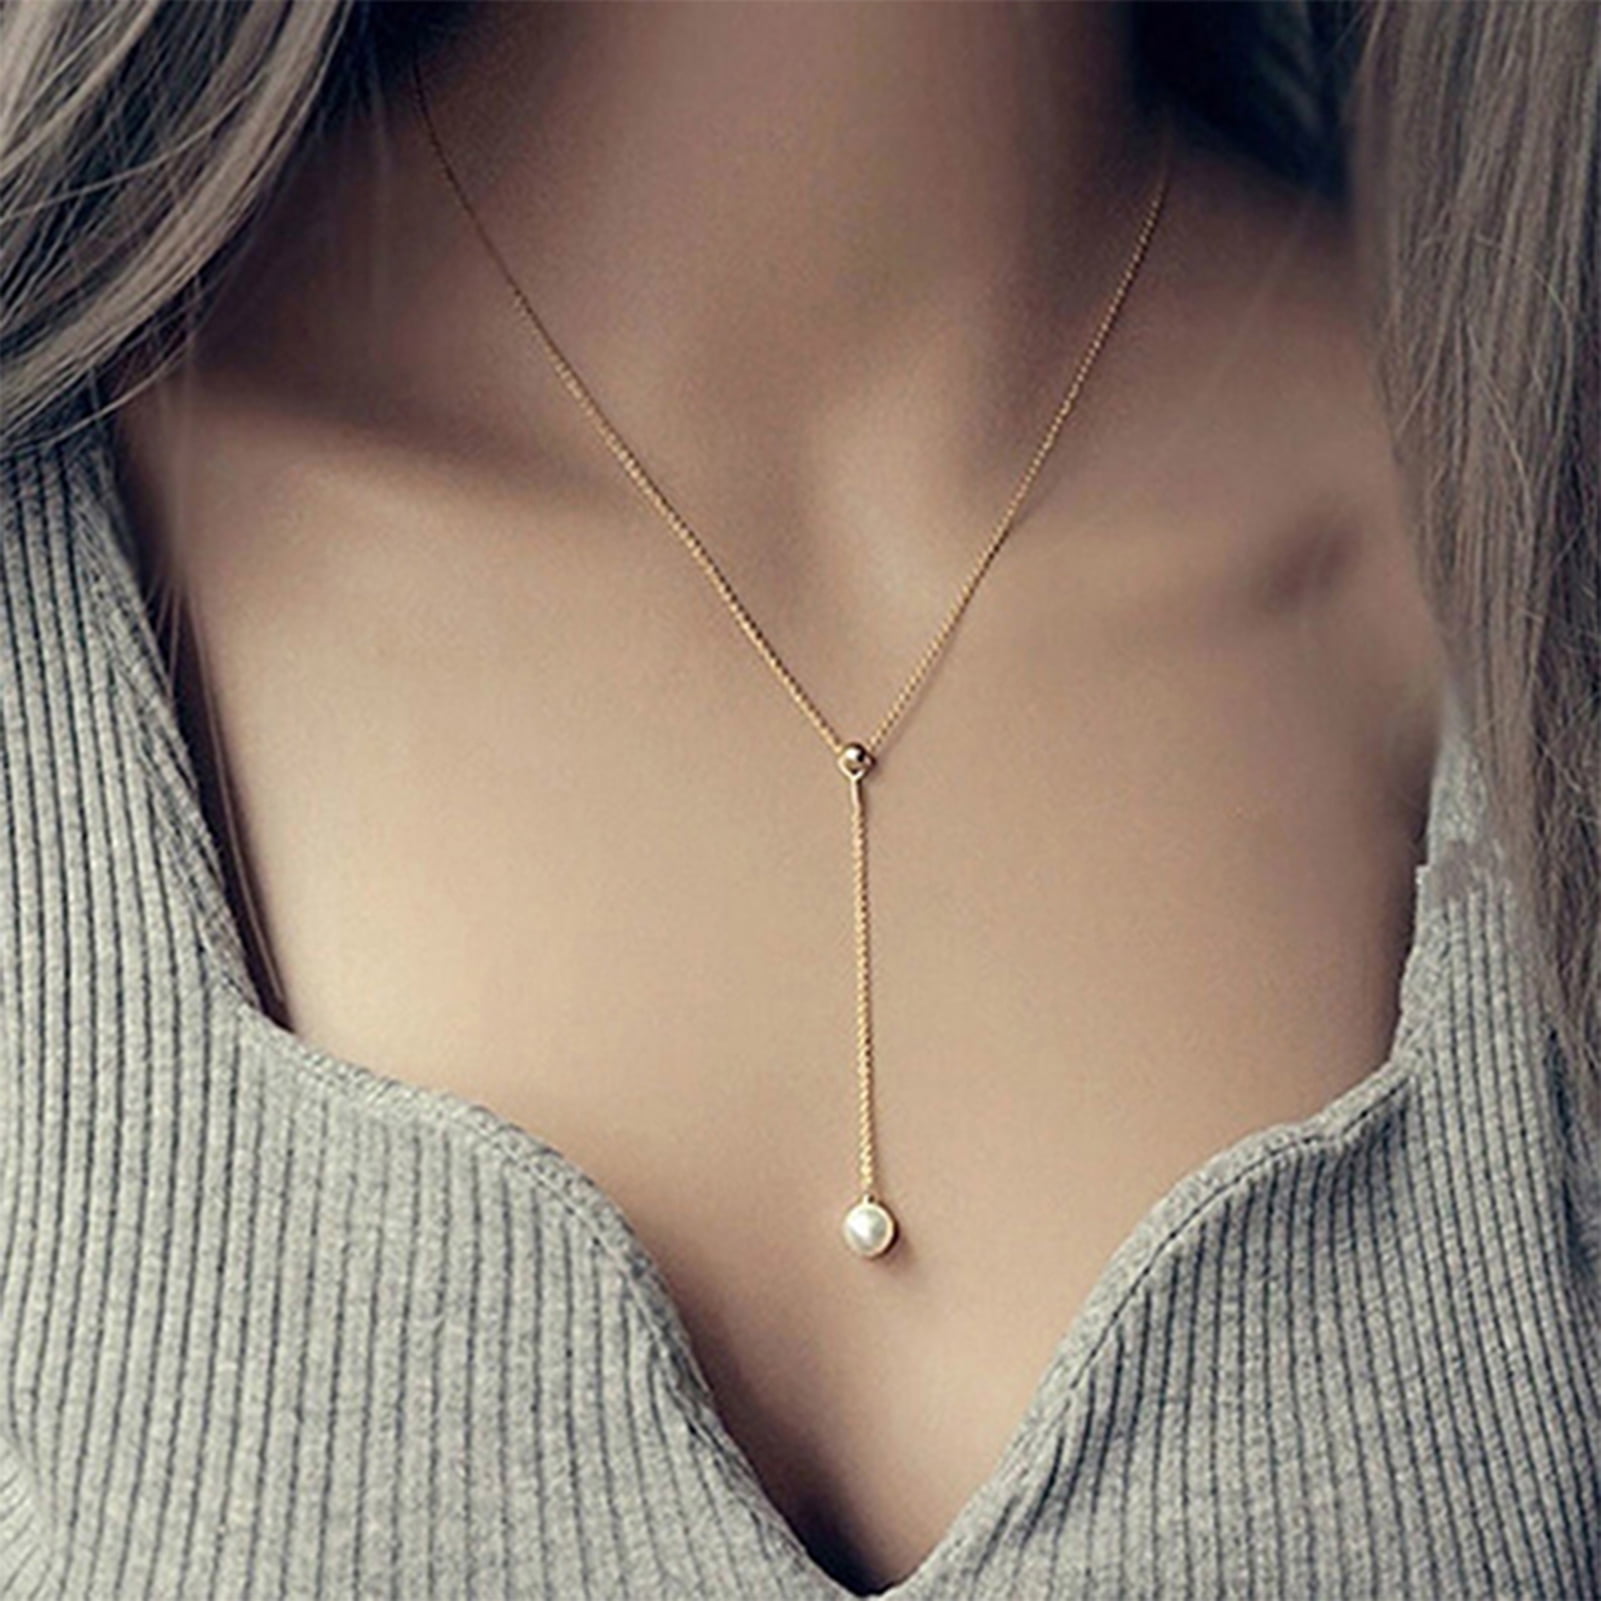 Ladies Necklace Long Clavicle Body Chain Elegant Beach Jewelry Women Gifts YI 